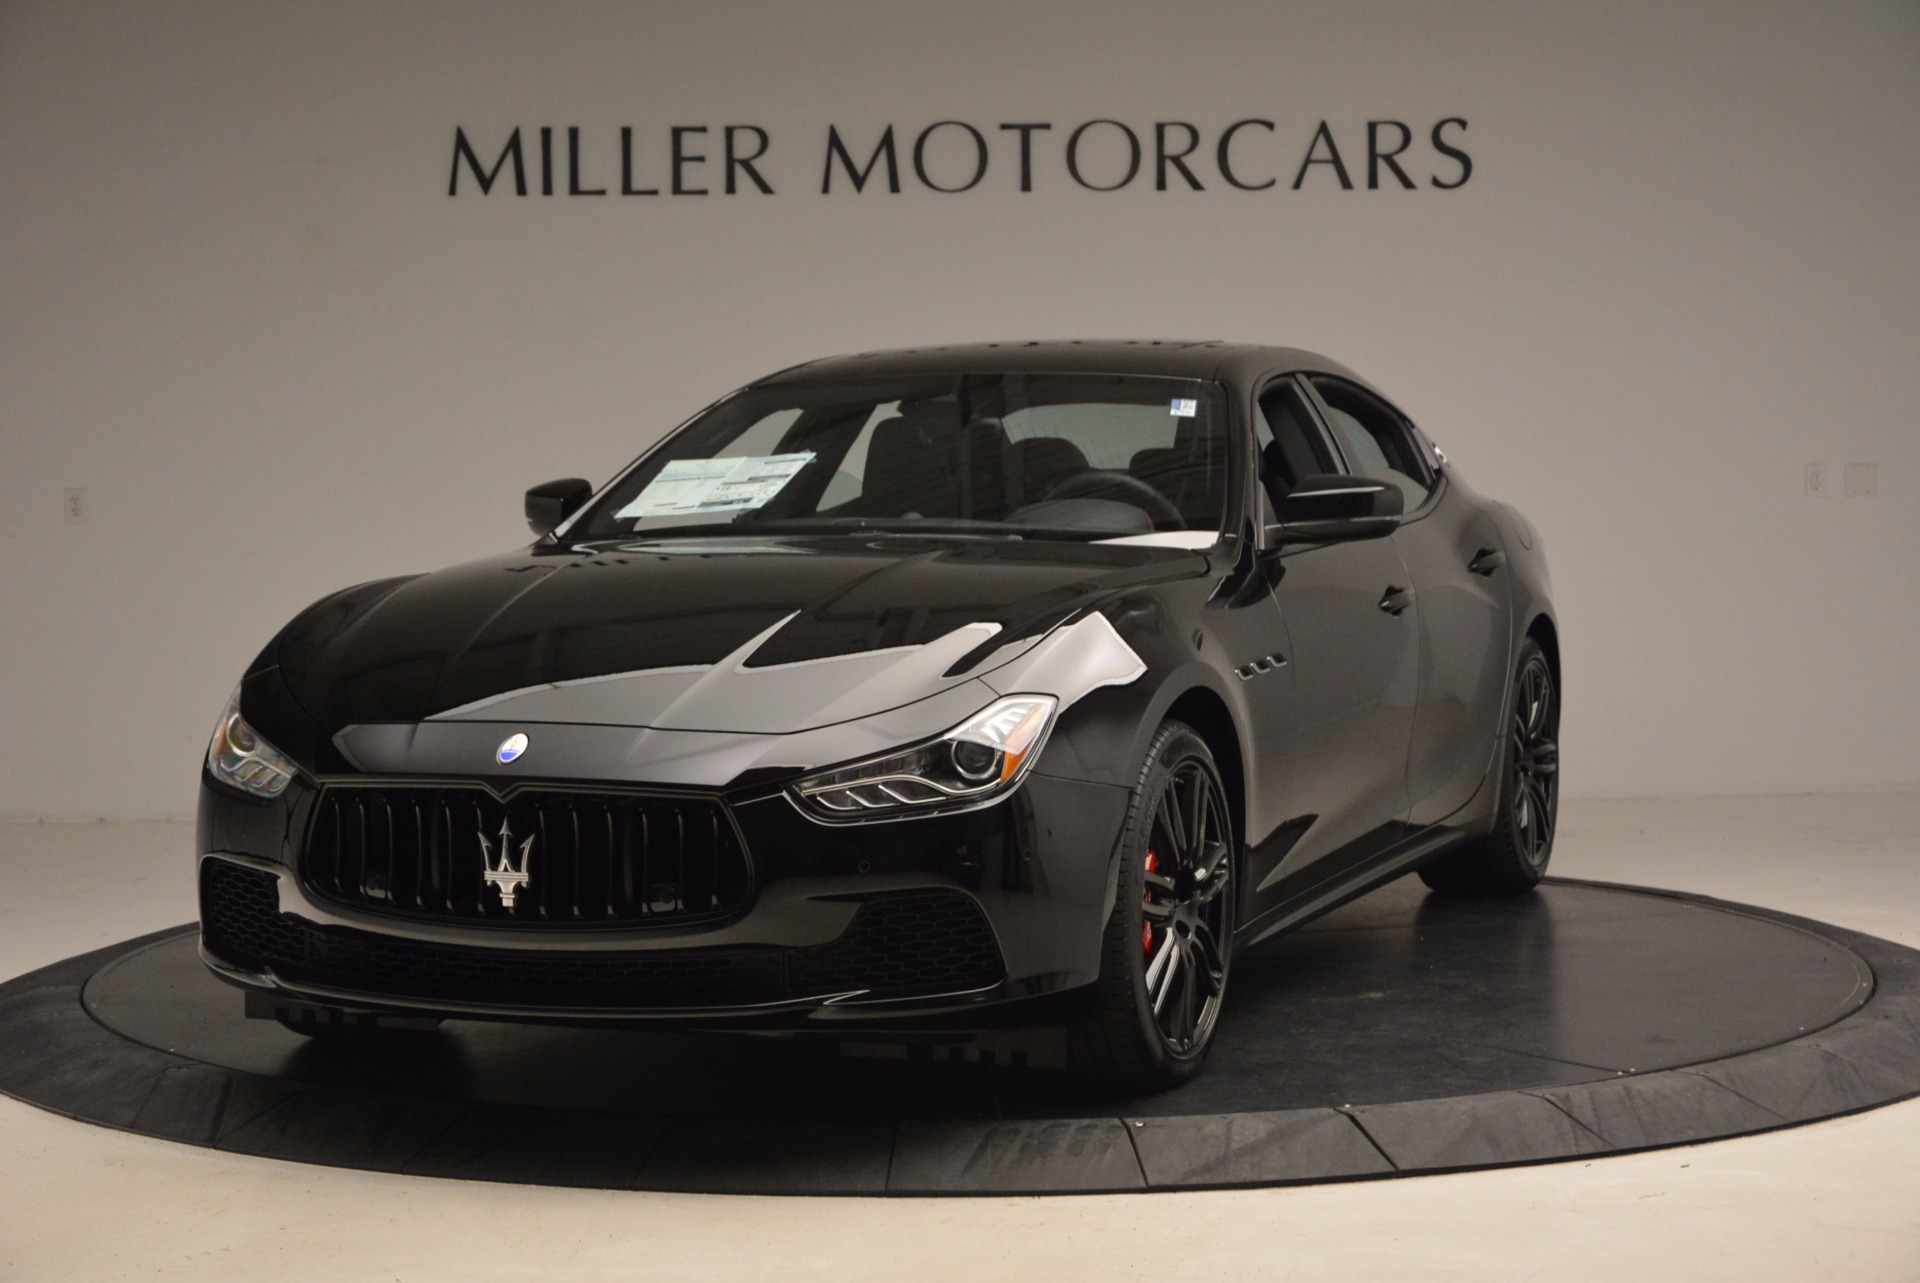 New 2017 Maserati Ghibli Nerissimo Edition S Q4 for sale Sold at Maserati of Westport in Westport CT 06880 1